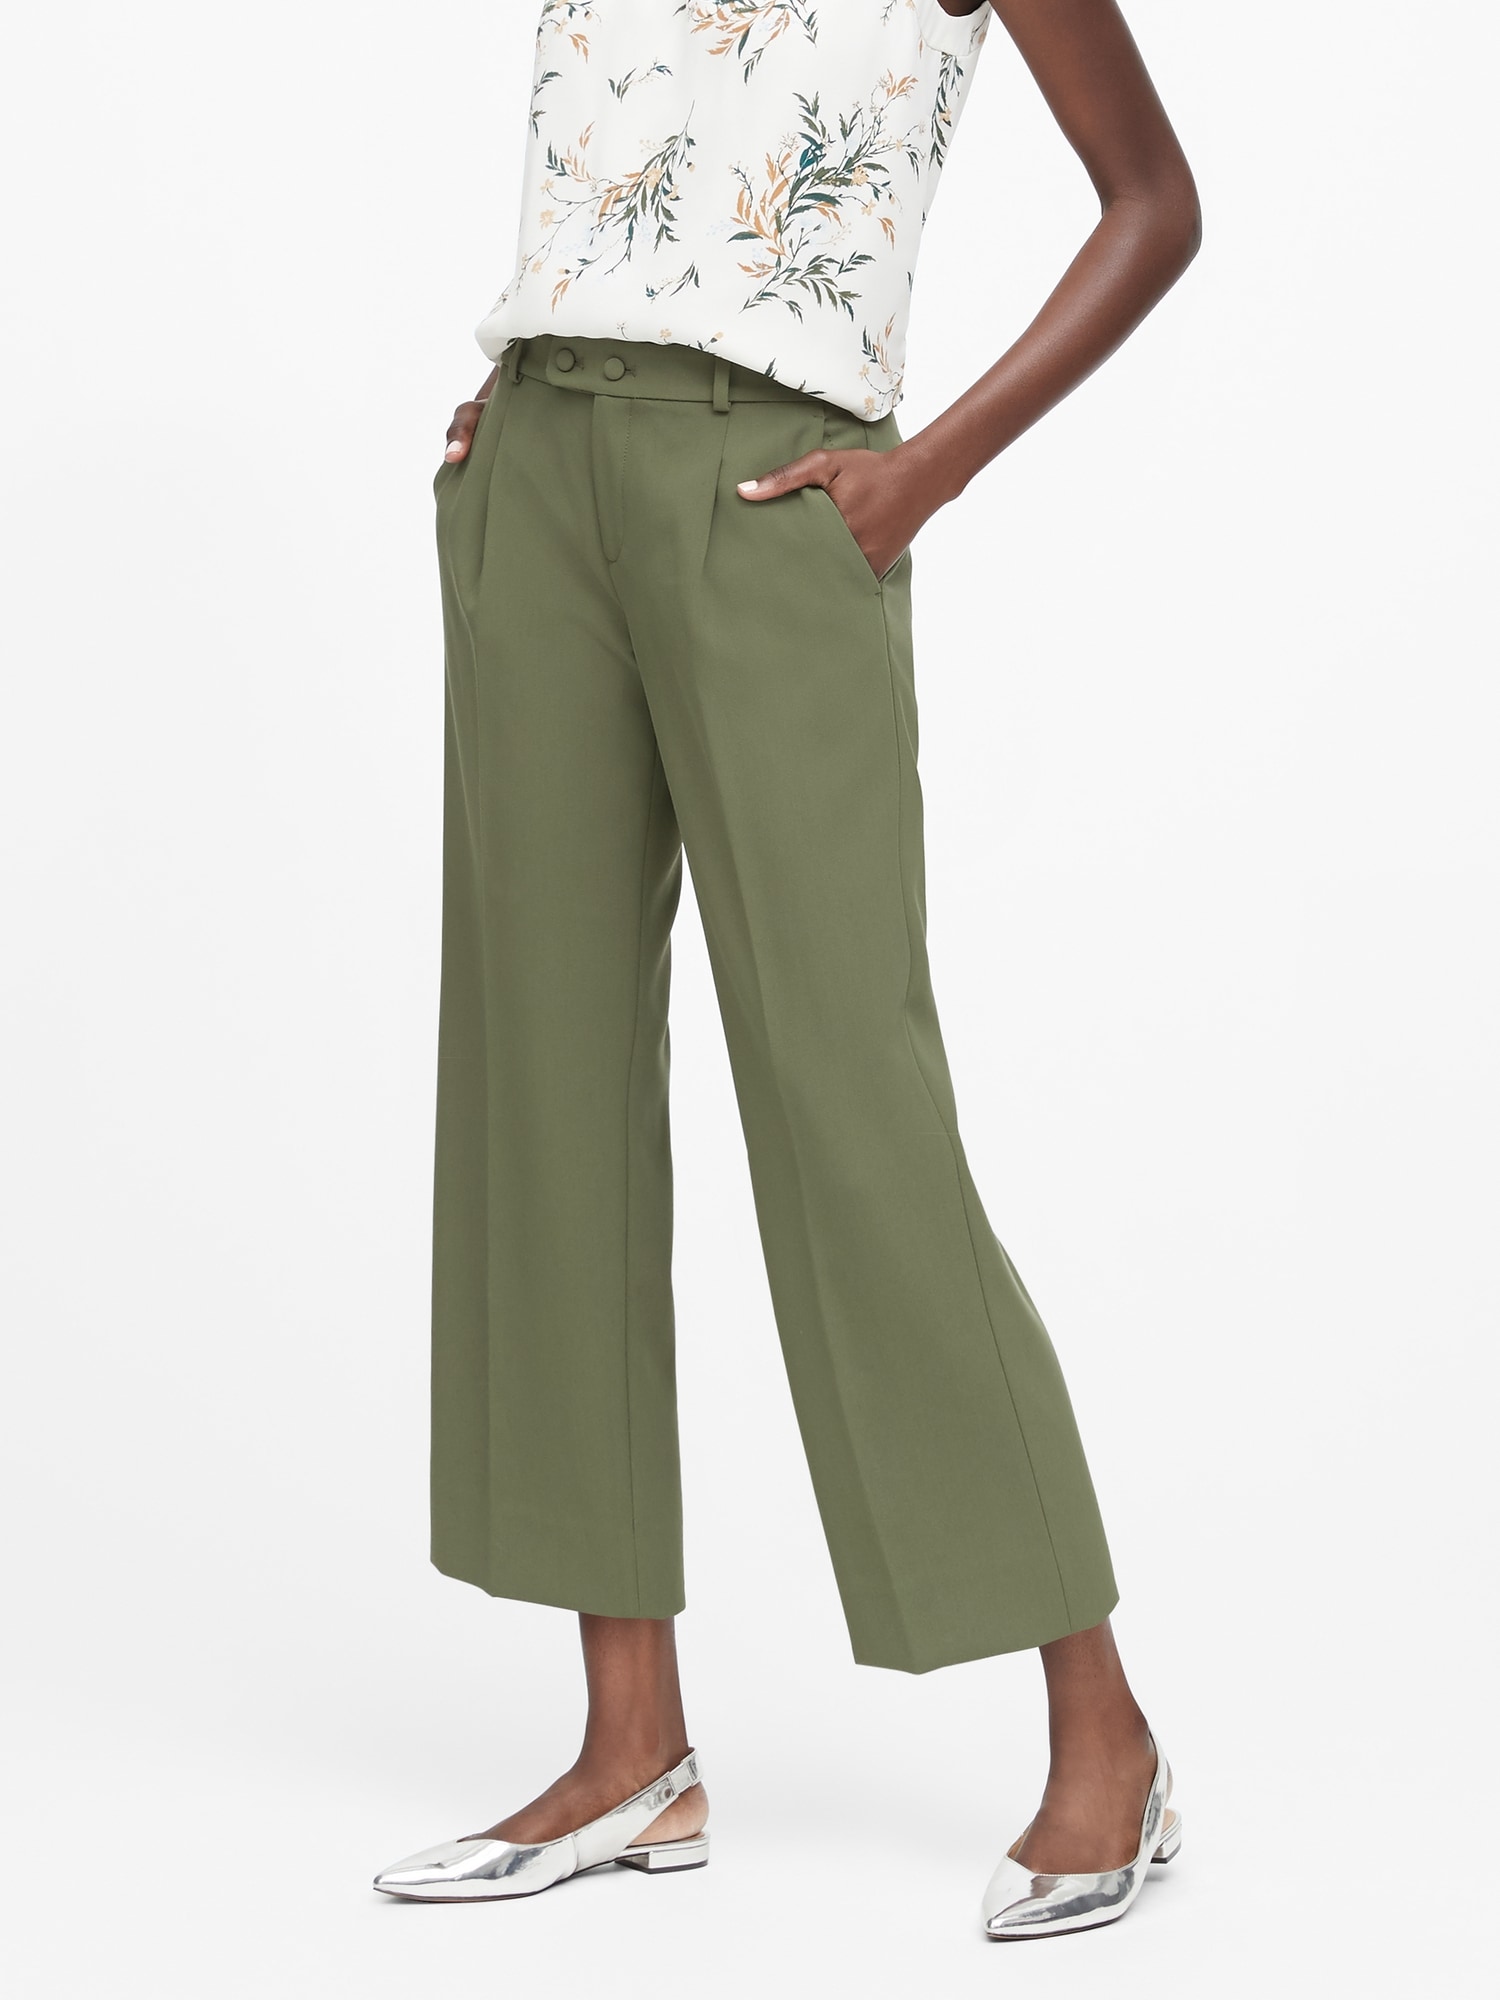 Logan Trouser-Fit Pleated Cropped Pants